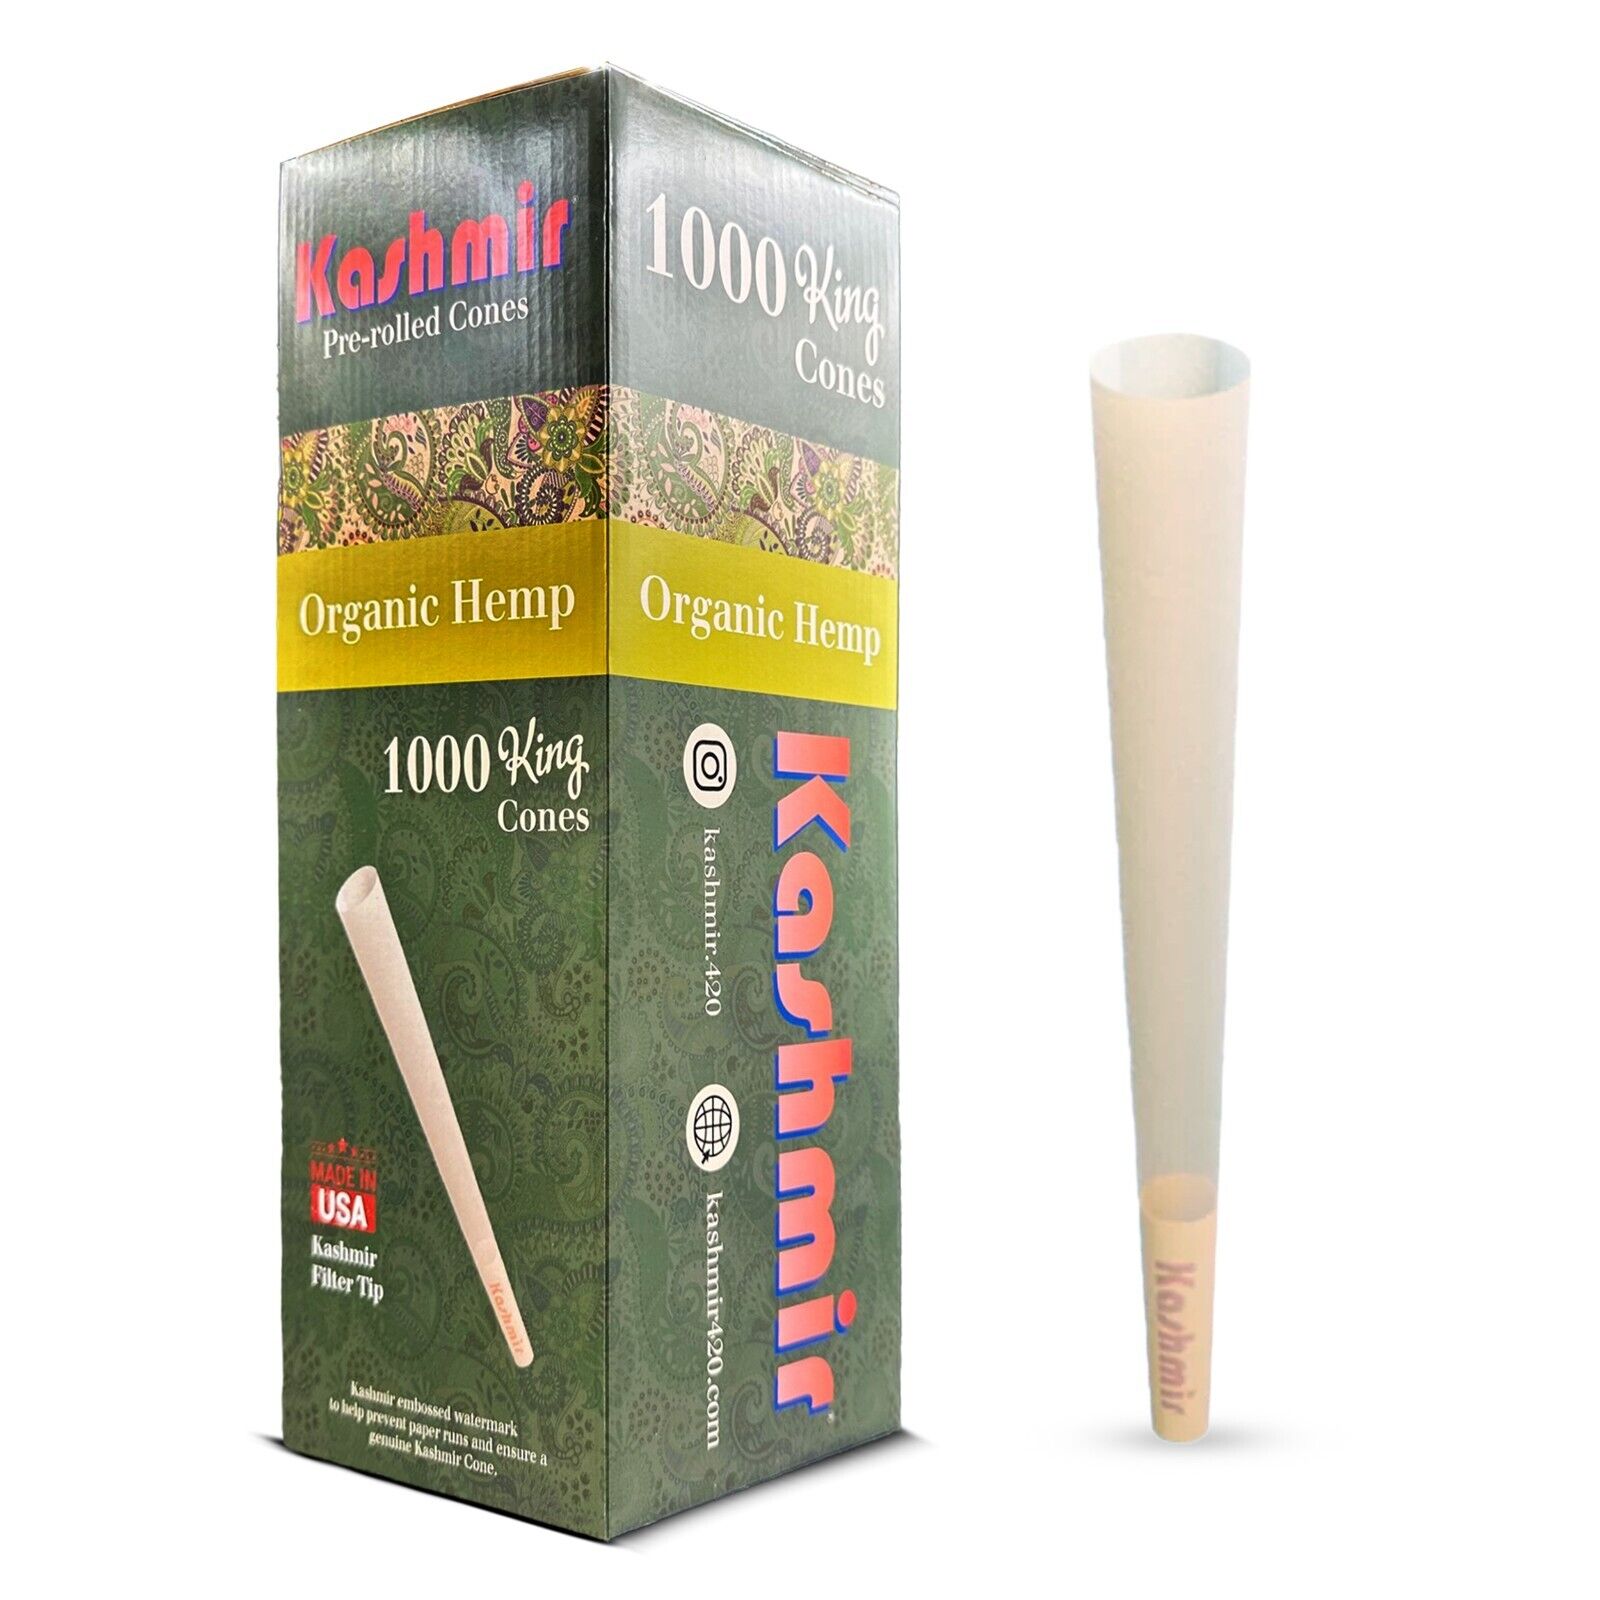 Kashmir Pre Rolled Cones King Size Organic Rolling Papers Bulk Pack: 1000 Cones